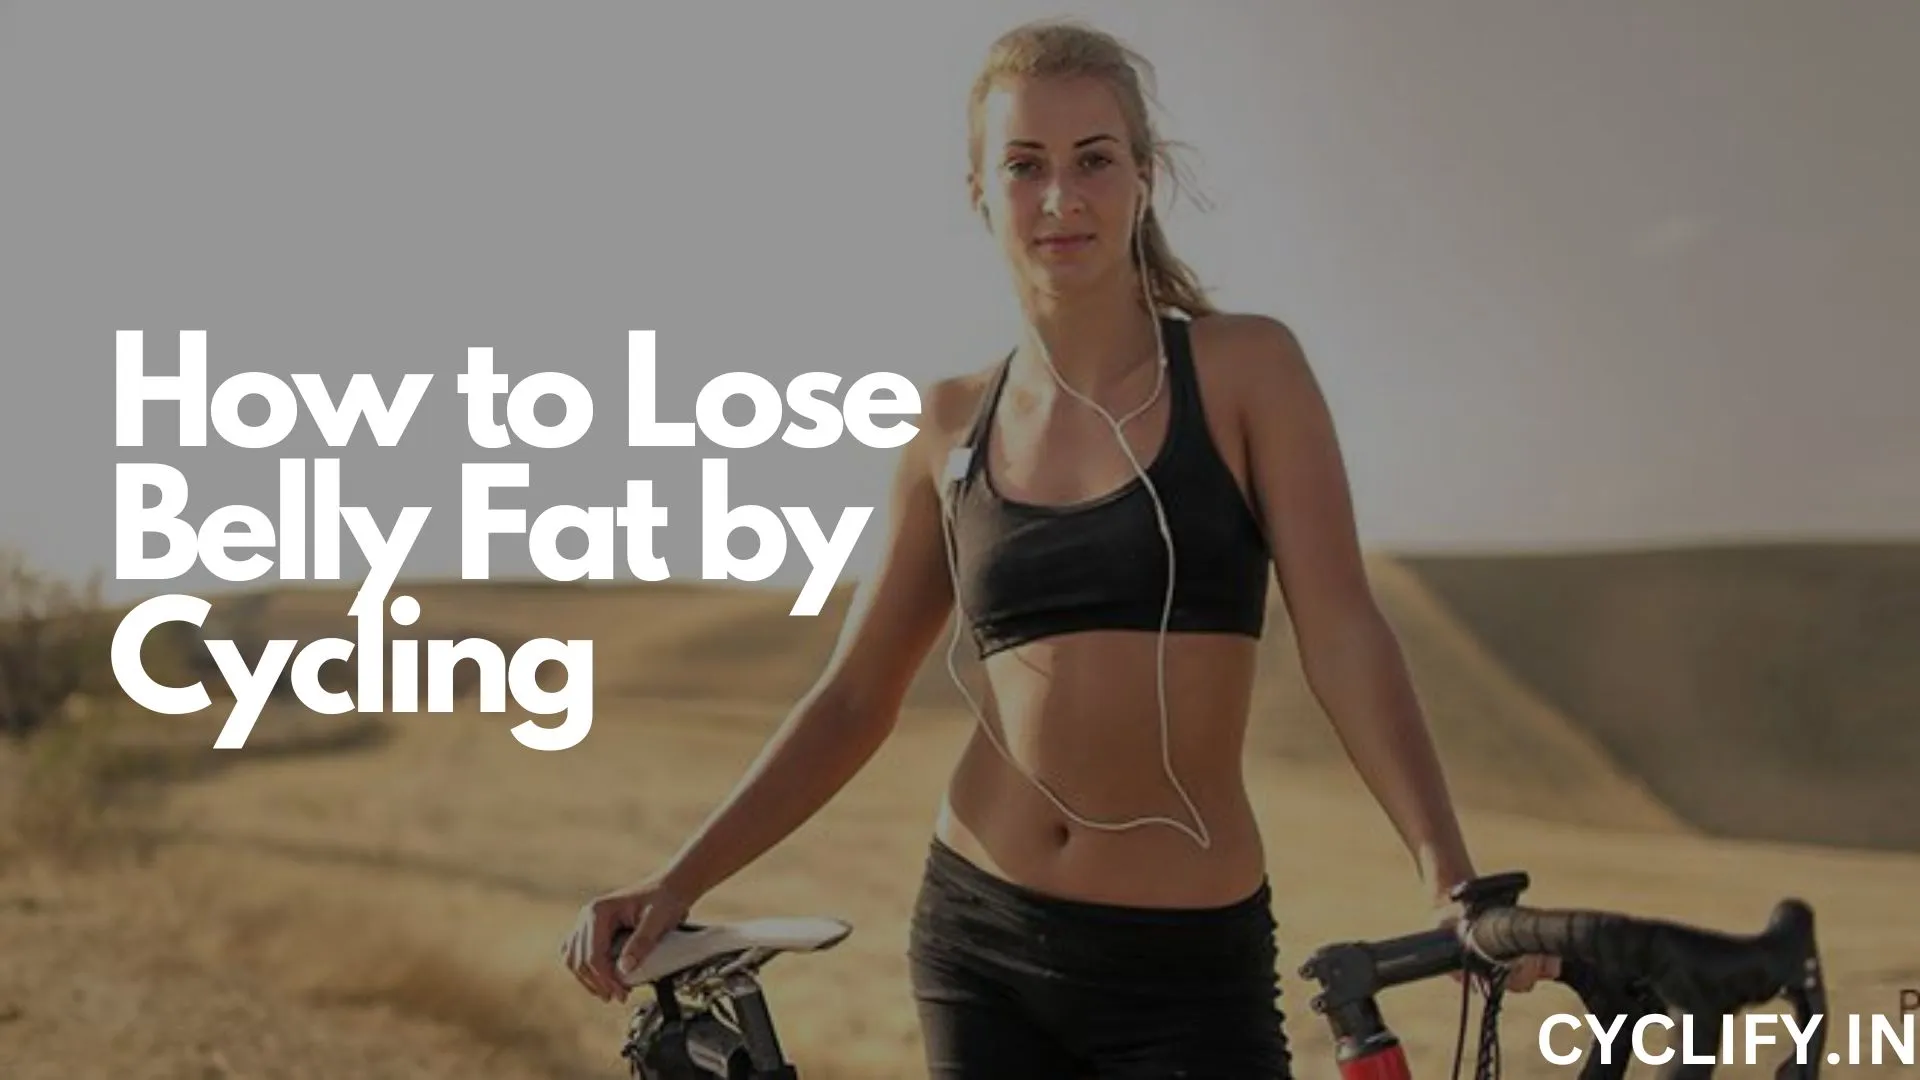 How to lose belly fat by cycling - a lady cyclist standing next to her red gravel bike in a desert like terrain.